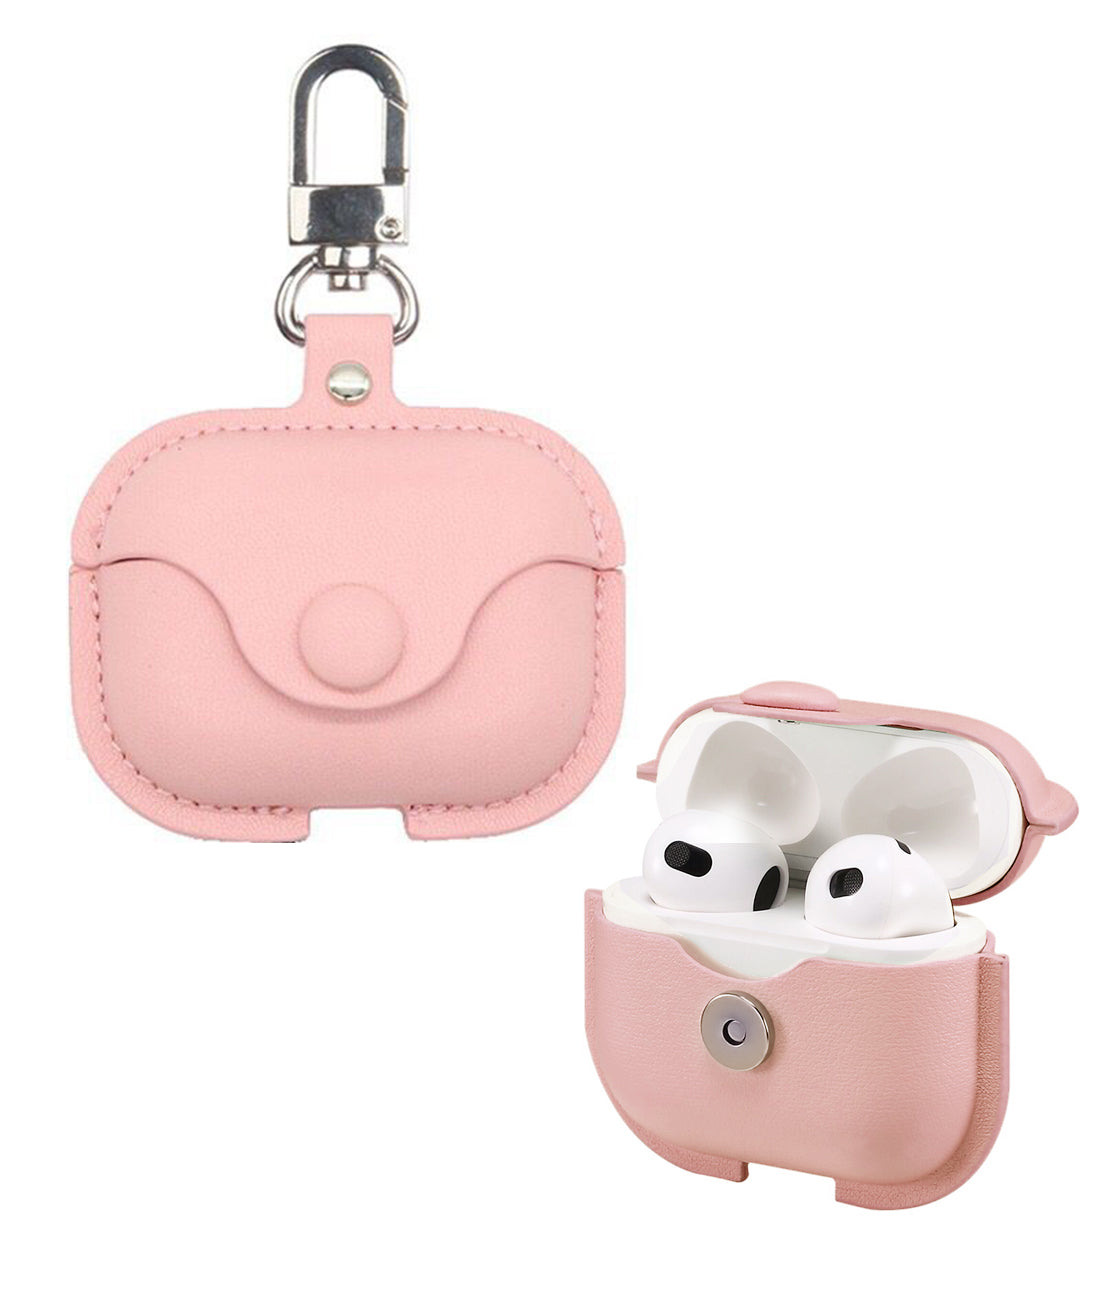 Miitoomo for Apple AirPods Case Leather Hybrid Snap Closure Case Cover Charge with case on